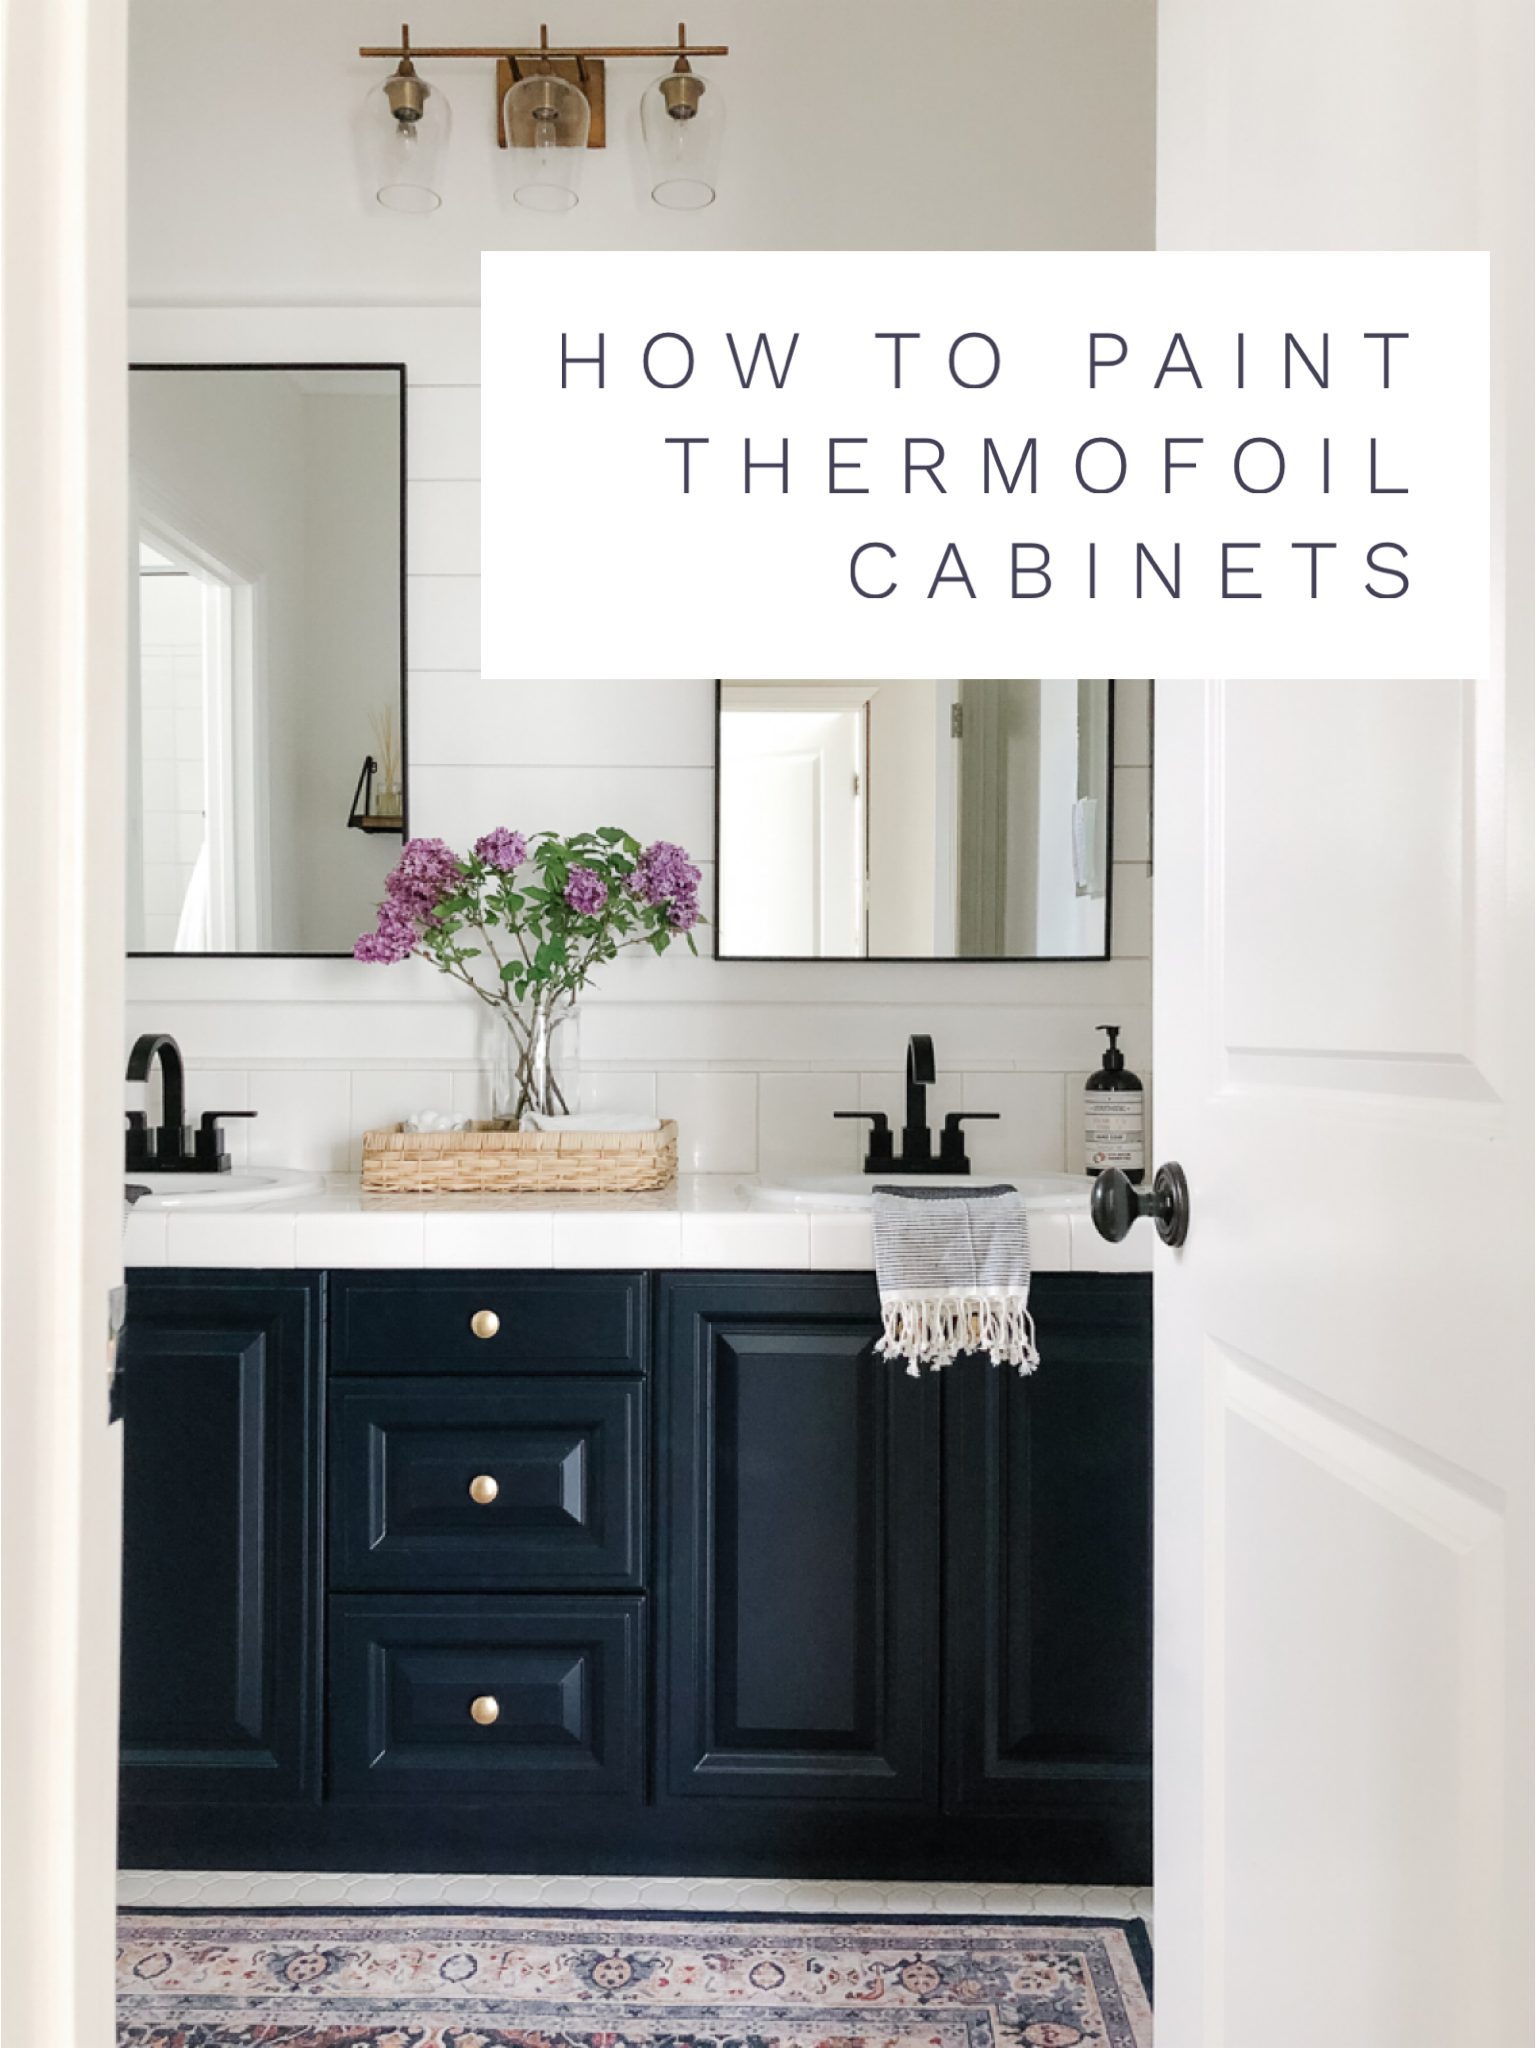 How To Paint Theril Cabinets A, How To Sand Bathroom Cabinets Before Painting